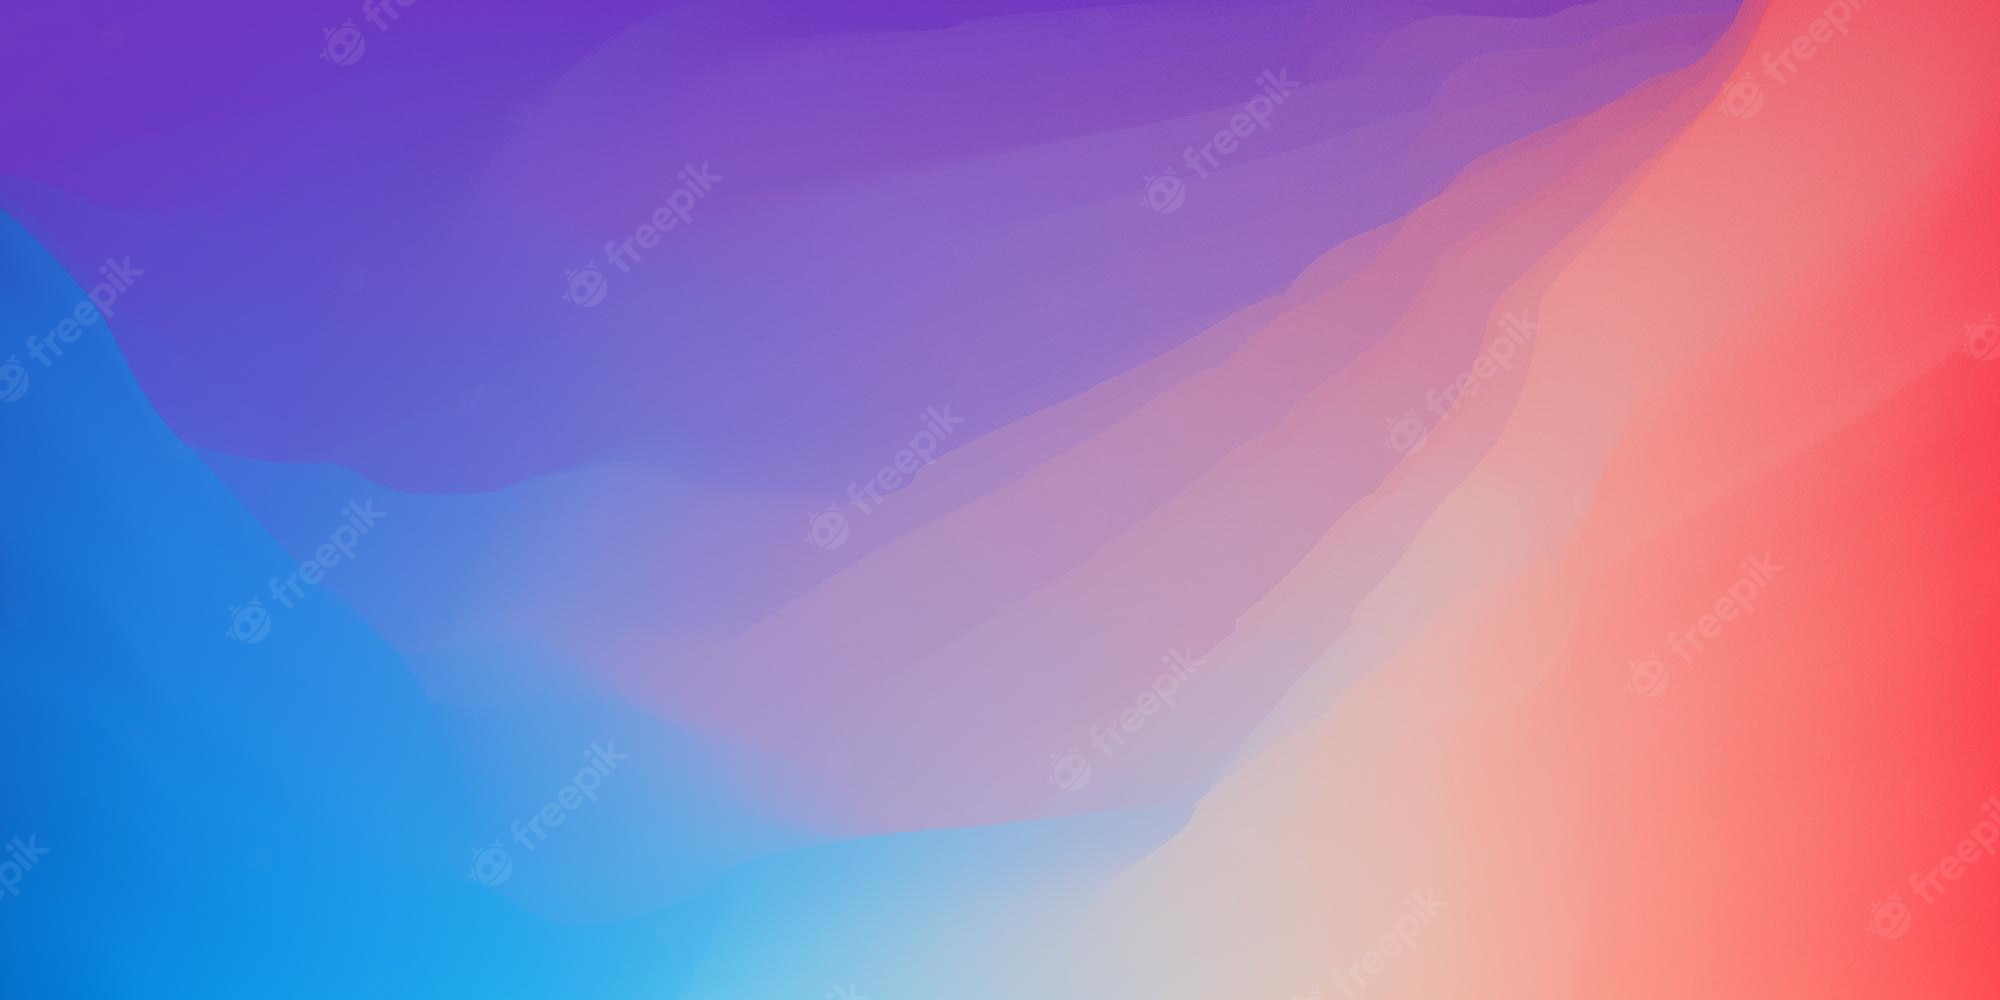 Premium Vector. Colorful blurred gradients abstract background with vivid purple cyan blurred colorful wallpaper